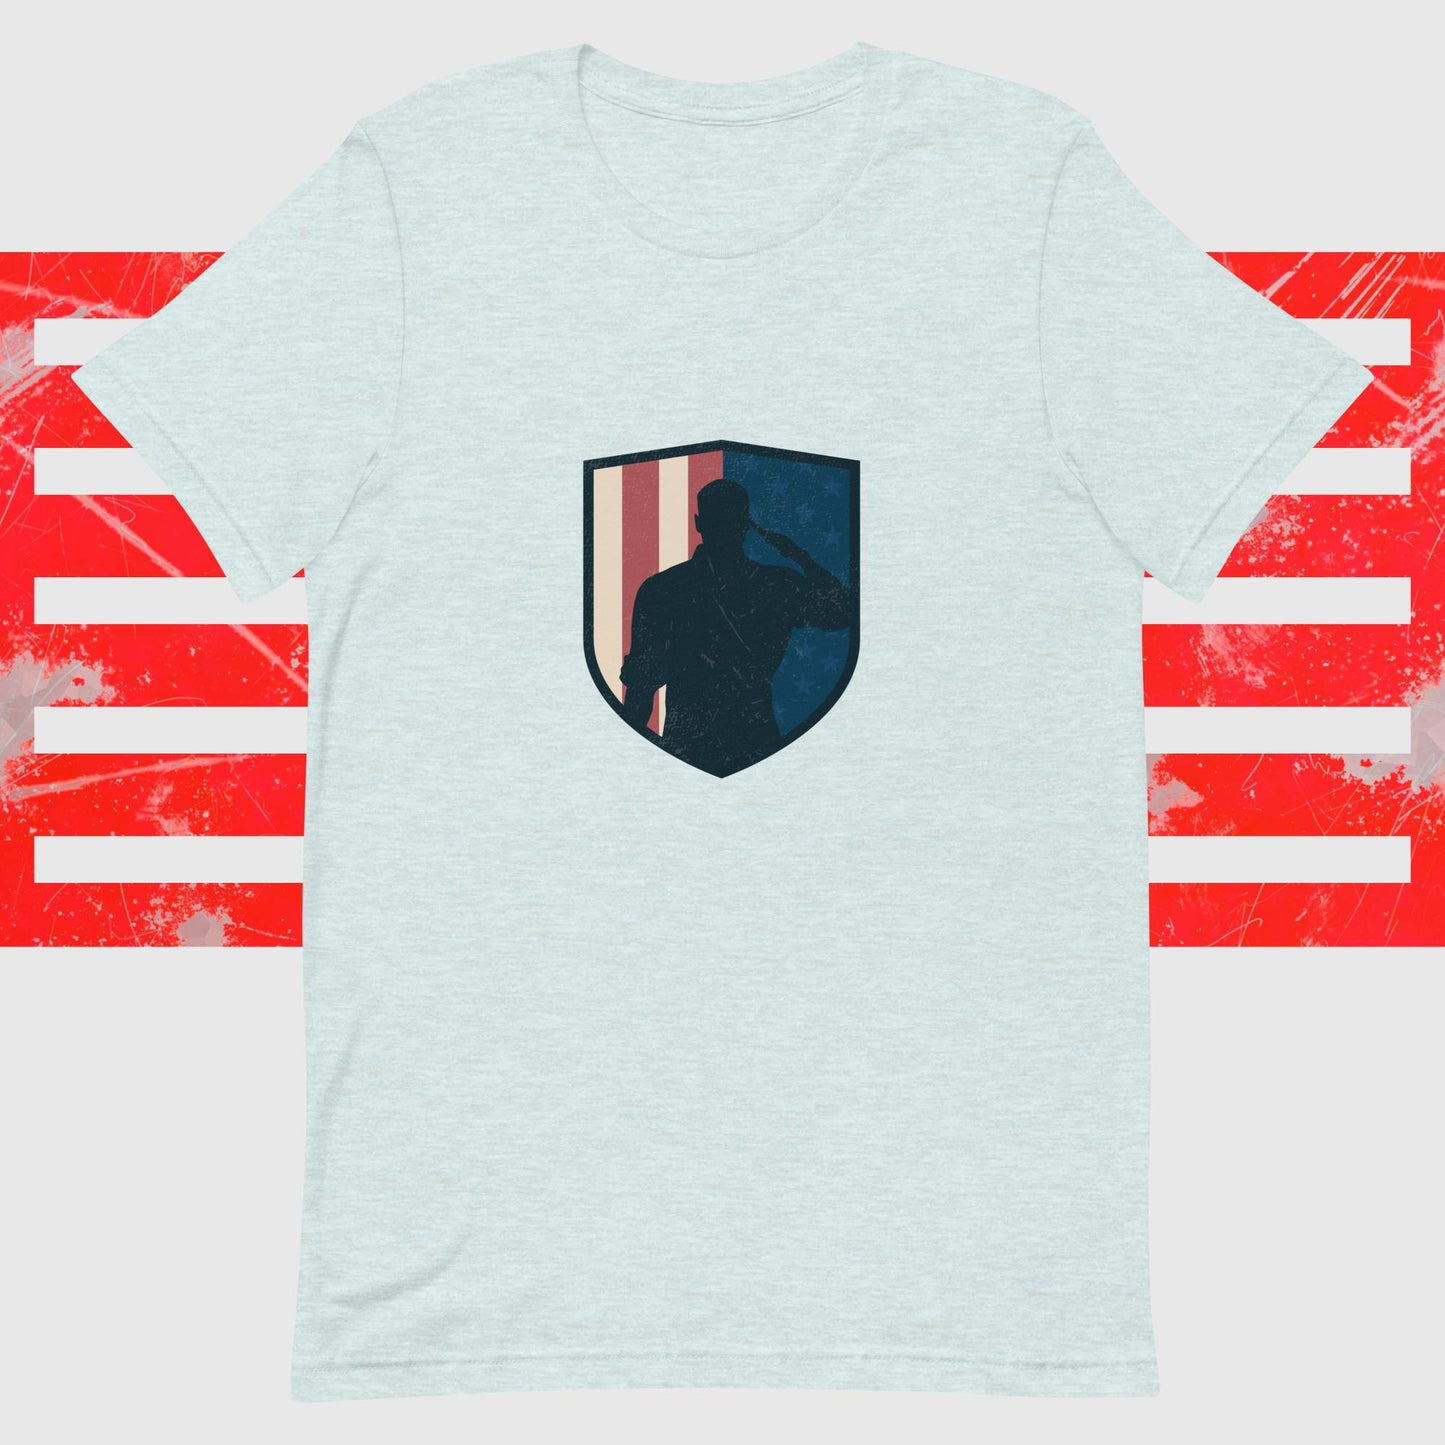 PATRIOTIC T-SHIRT AMERICAN SOLDIER LOGO ICE BLUE FRONT - www.firstamericanstore.com